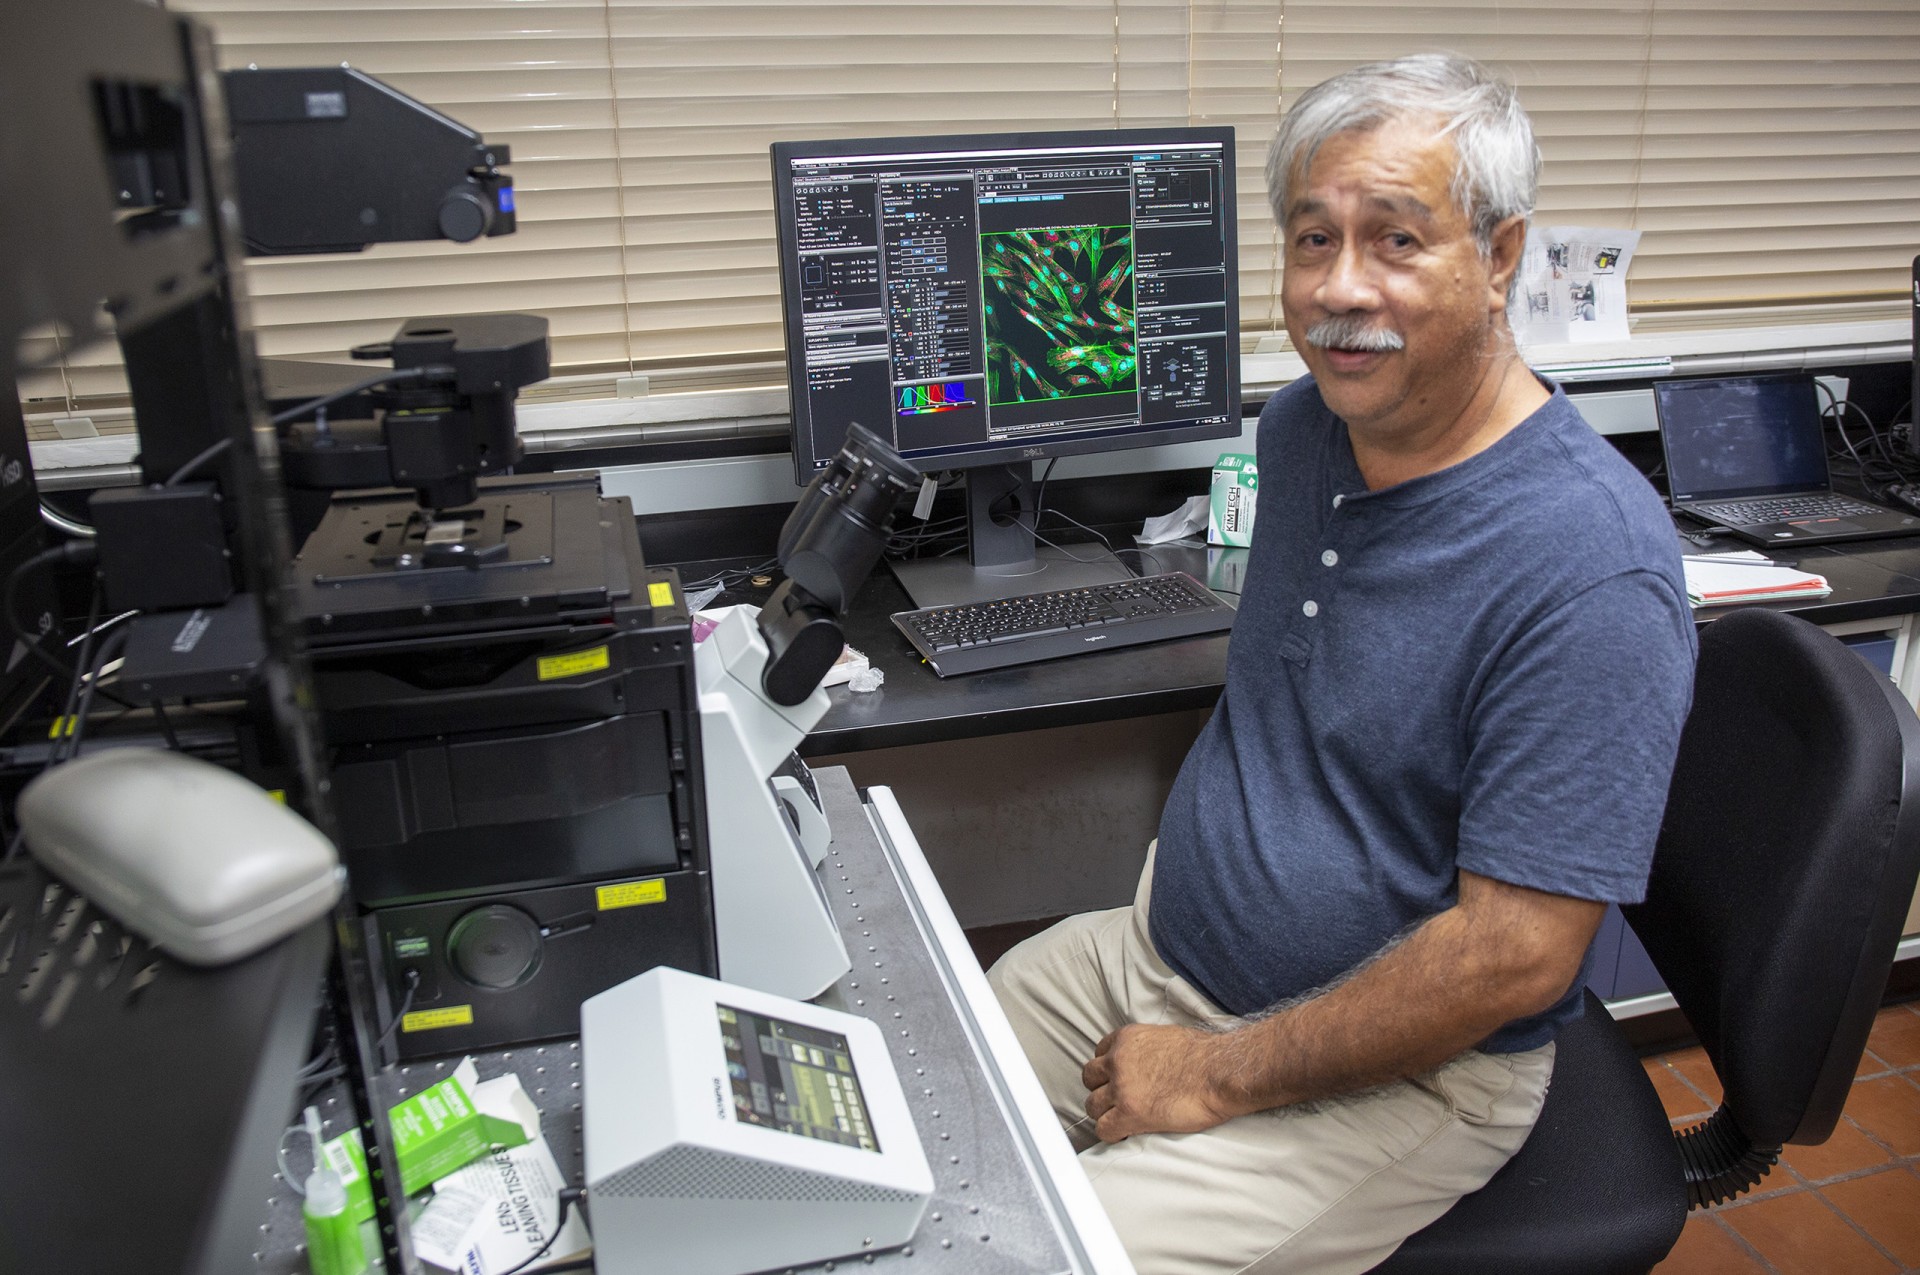 STRI has a new Laser scanning confocal microscope